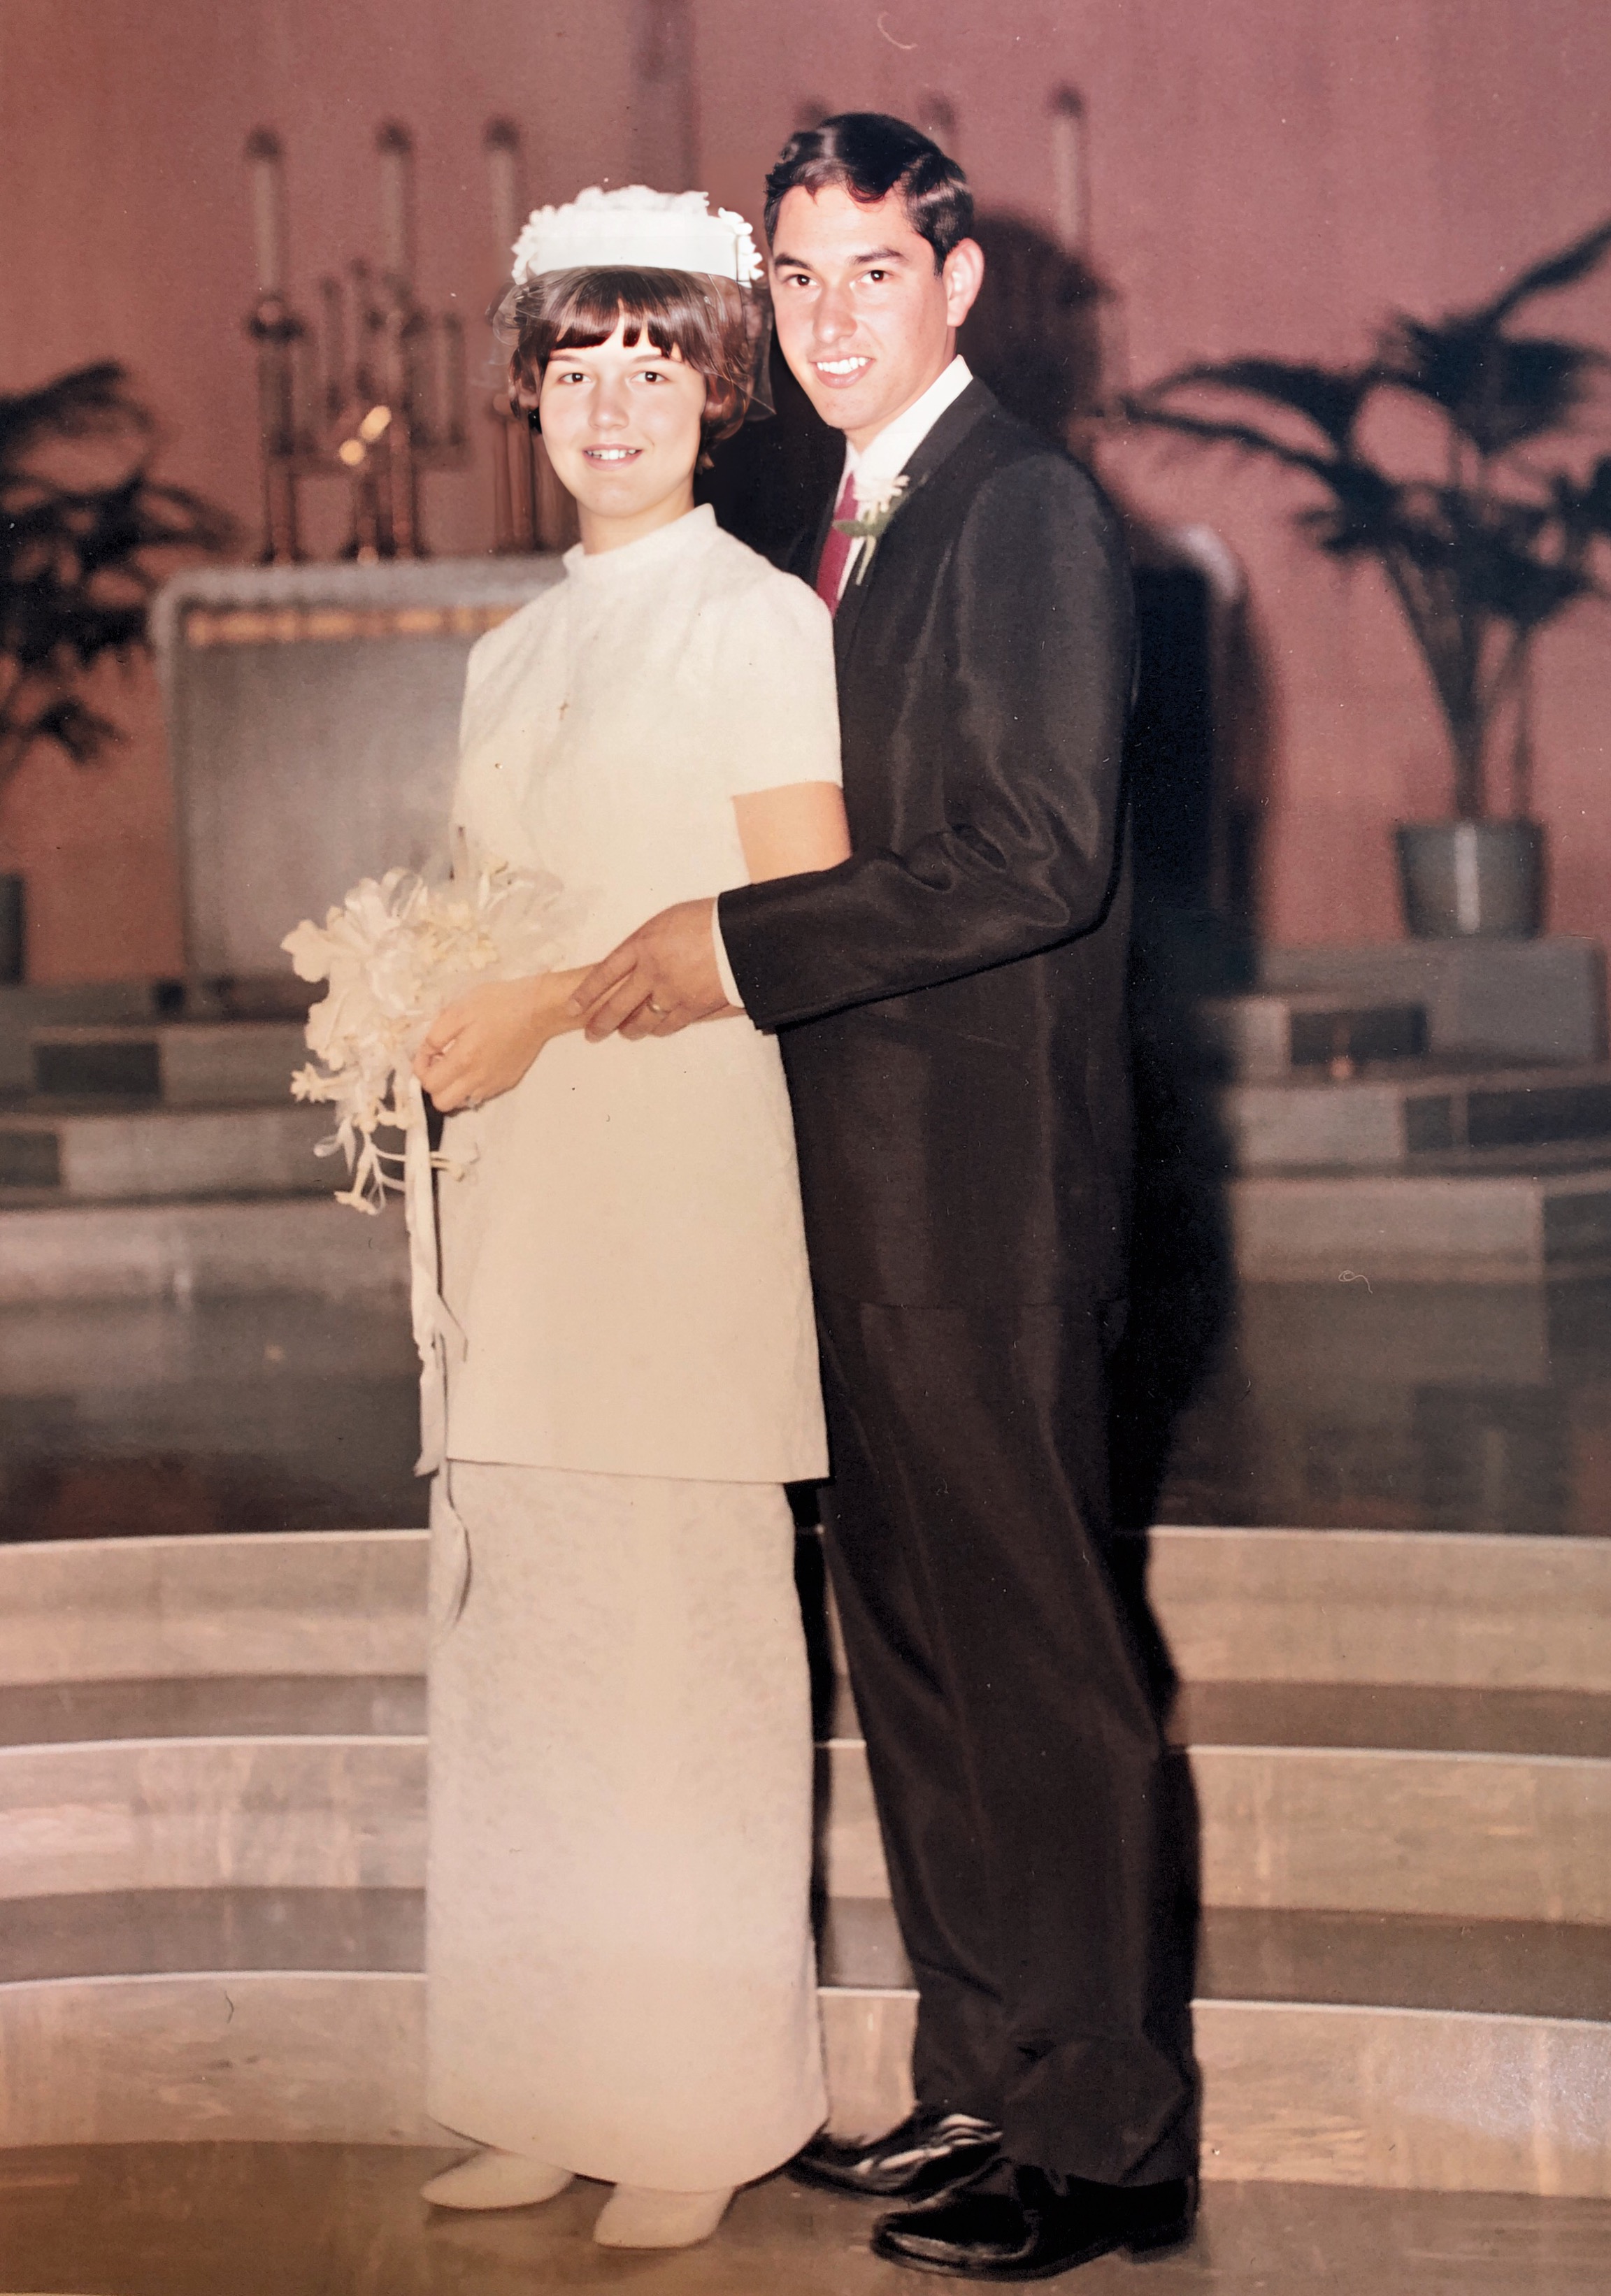 Stephanie and Bob Macchi Feb 18, 1967 St Lucy’s Campbell Ca